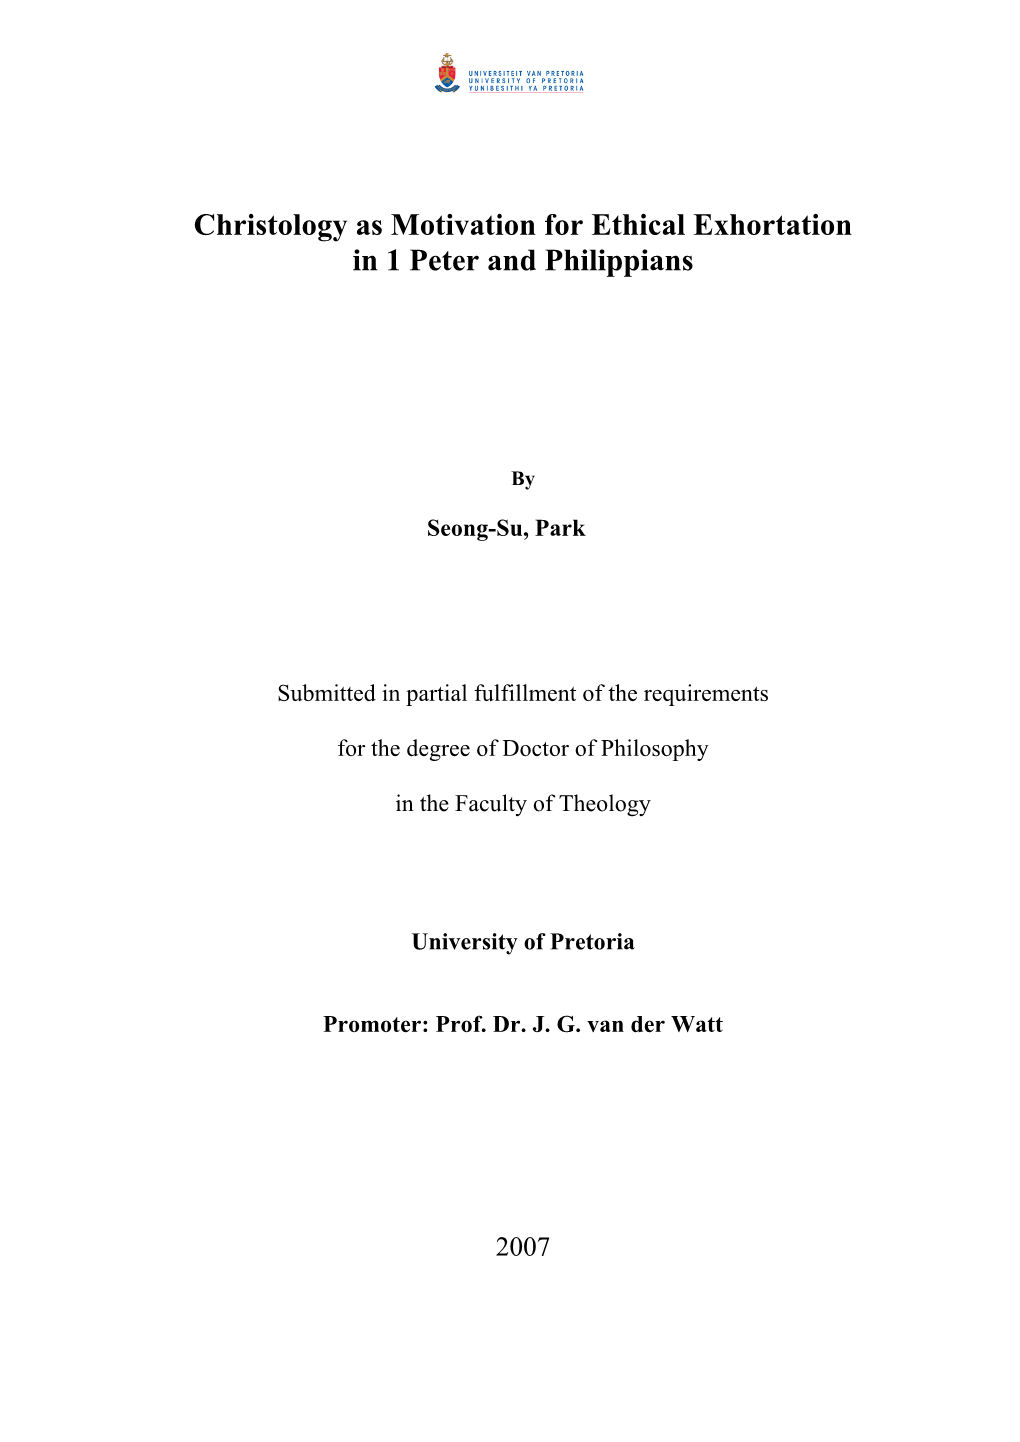 Christology As Motivation for Ethical Exhortation in 1 Peter and Philippians